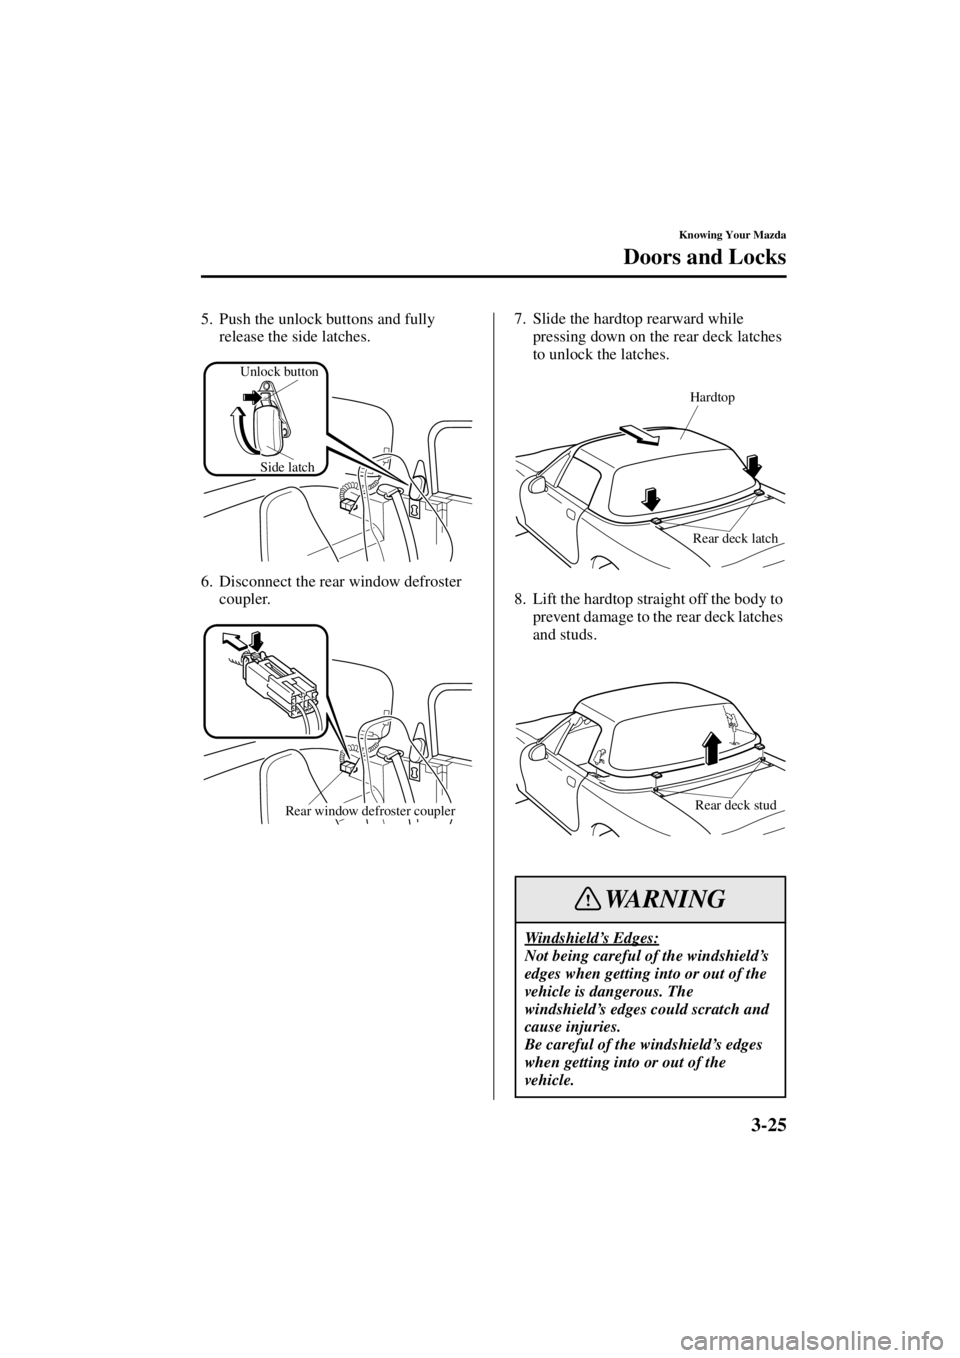 MAZDA MODEL SPEED MX-5 MIATA 2004 Repair Manual 3-25
Knowing Your Mazda
Doors and Locks
Form No. 8T02-EA-03L
5. Push the unlock buttons and fully release the side latches.
6. Disconnect the rear window defroster  coupler. 7. Slide the hardtop rearw